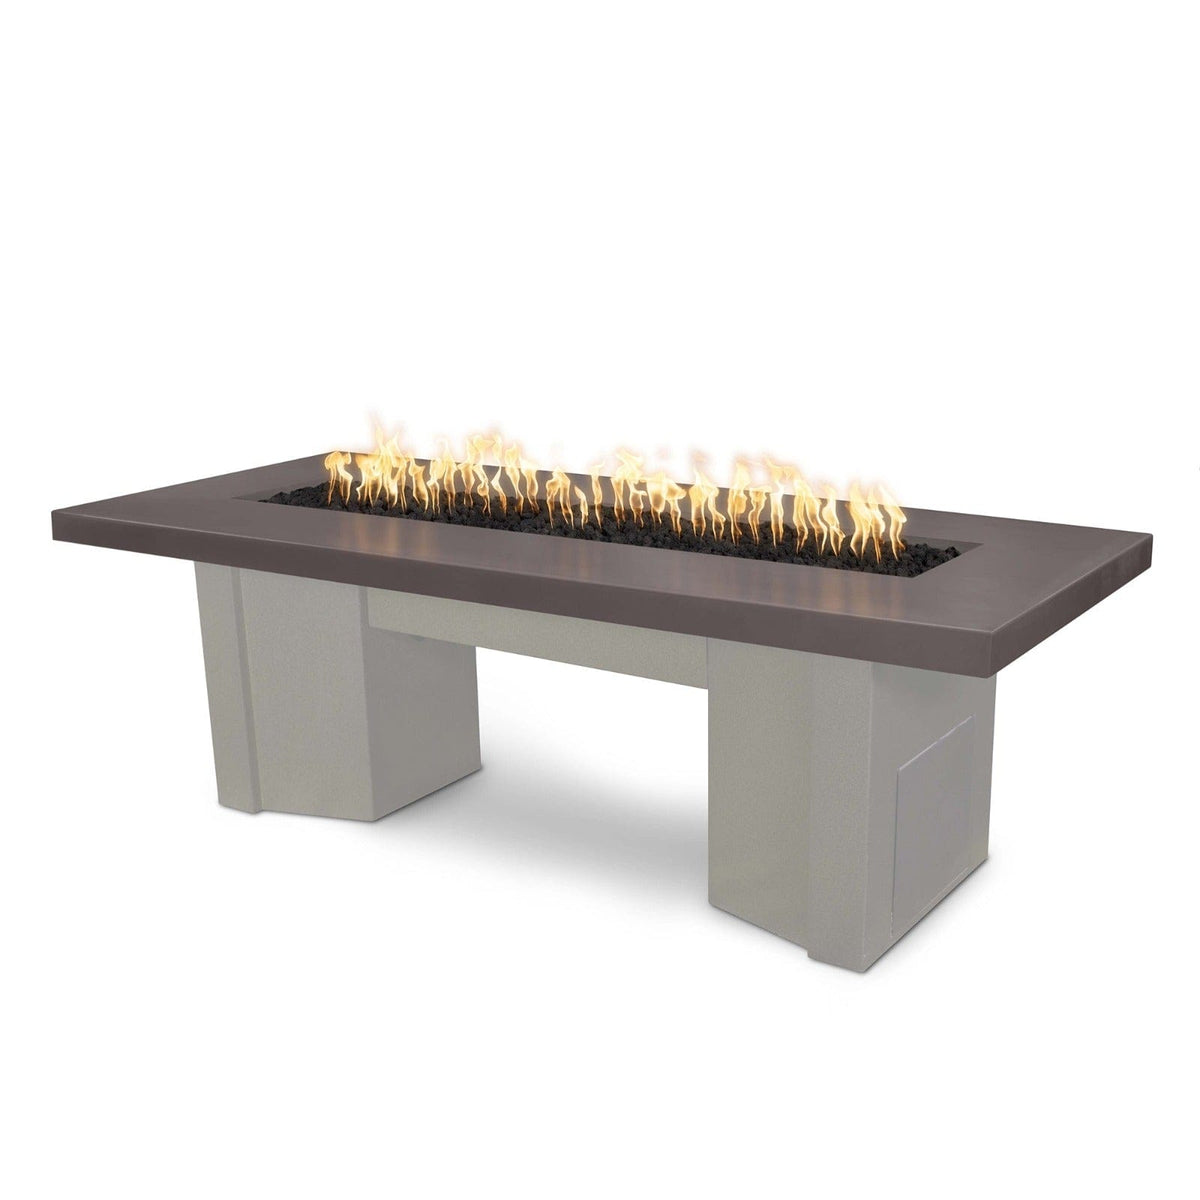 The Outdoor Plus Fire Features Chestnut (-CST) / Pewter Powder Coated Steel (-PEW) The Outdoor Plus 60&quot; Alameda Fire Table Smooth Concrete in Liquid Propane - 110V Plug &amp; Play Electronic Ignition / OPT-ALMGFRC60EKIT-LP